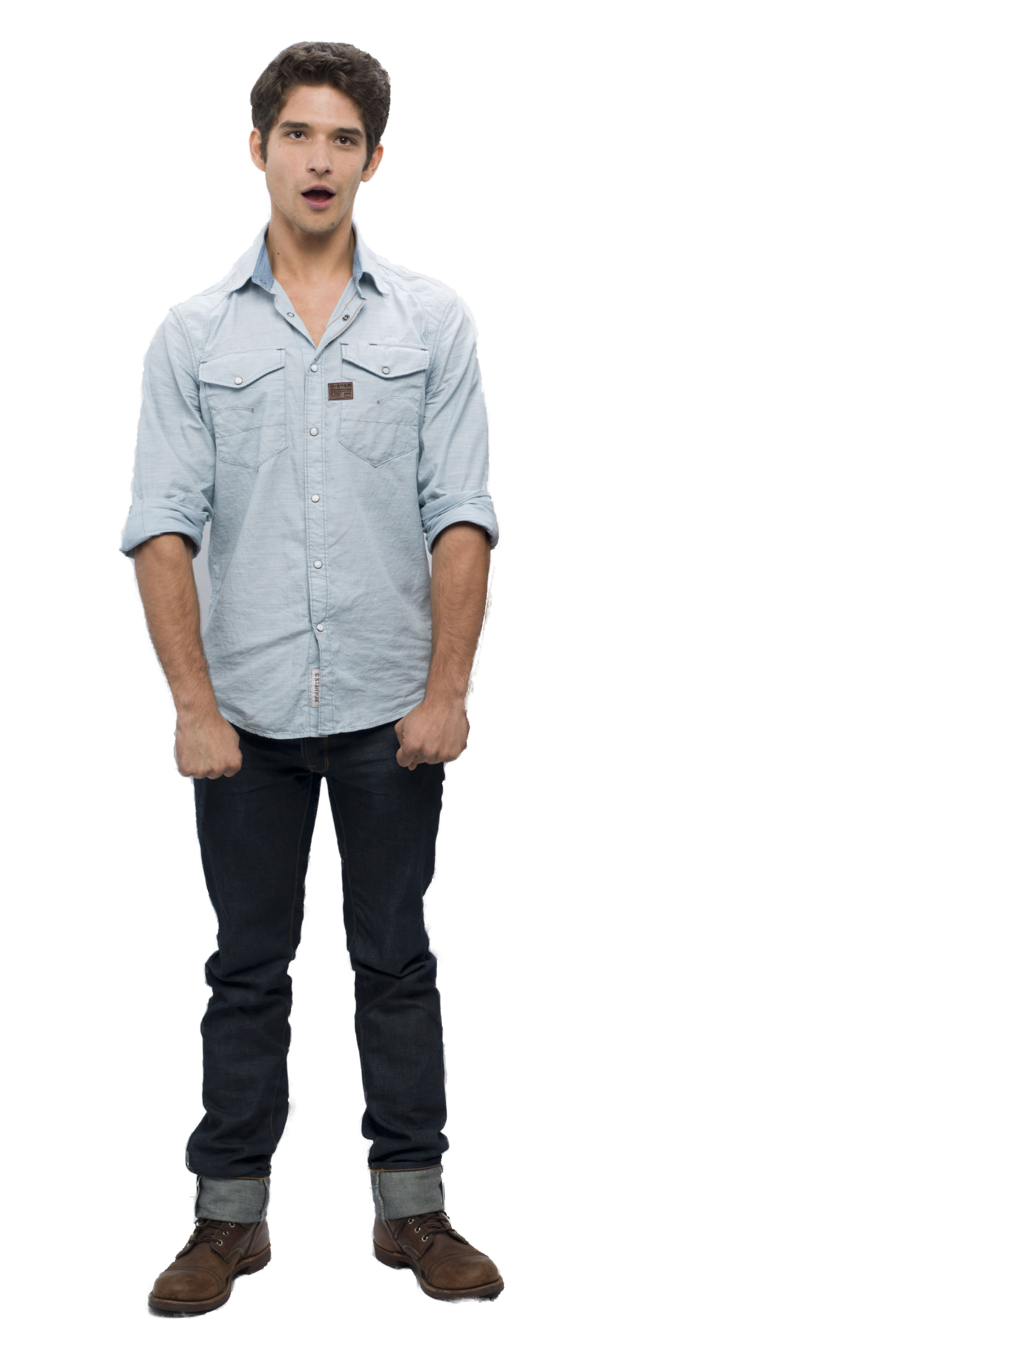 Tyler Posey PNG File